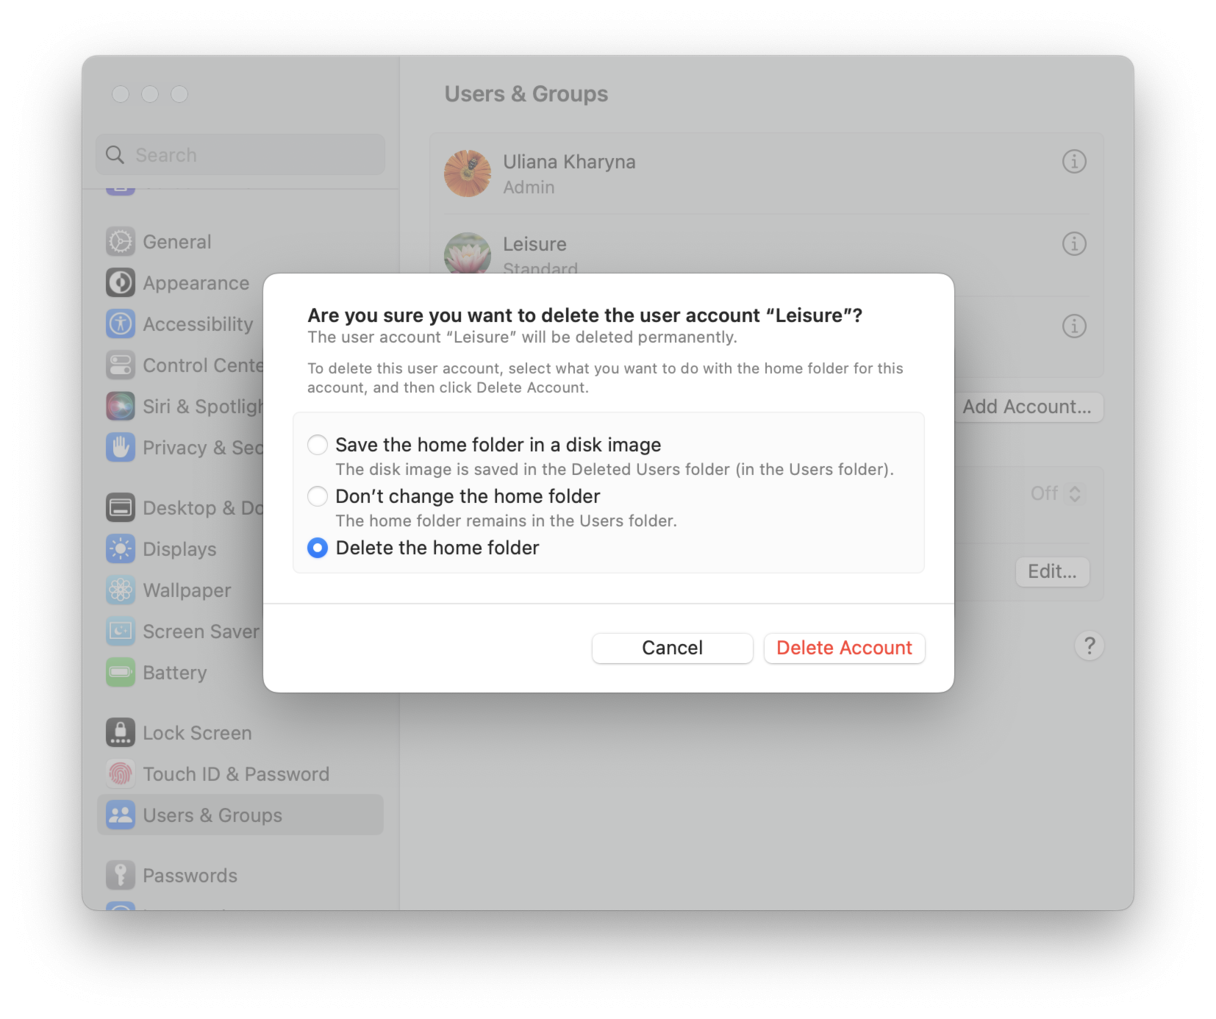 How to delete account on a Mac